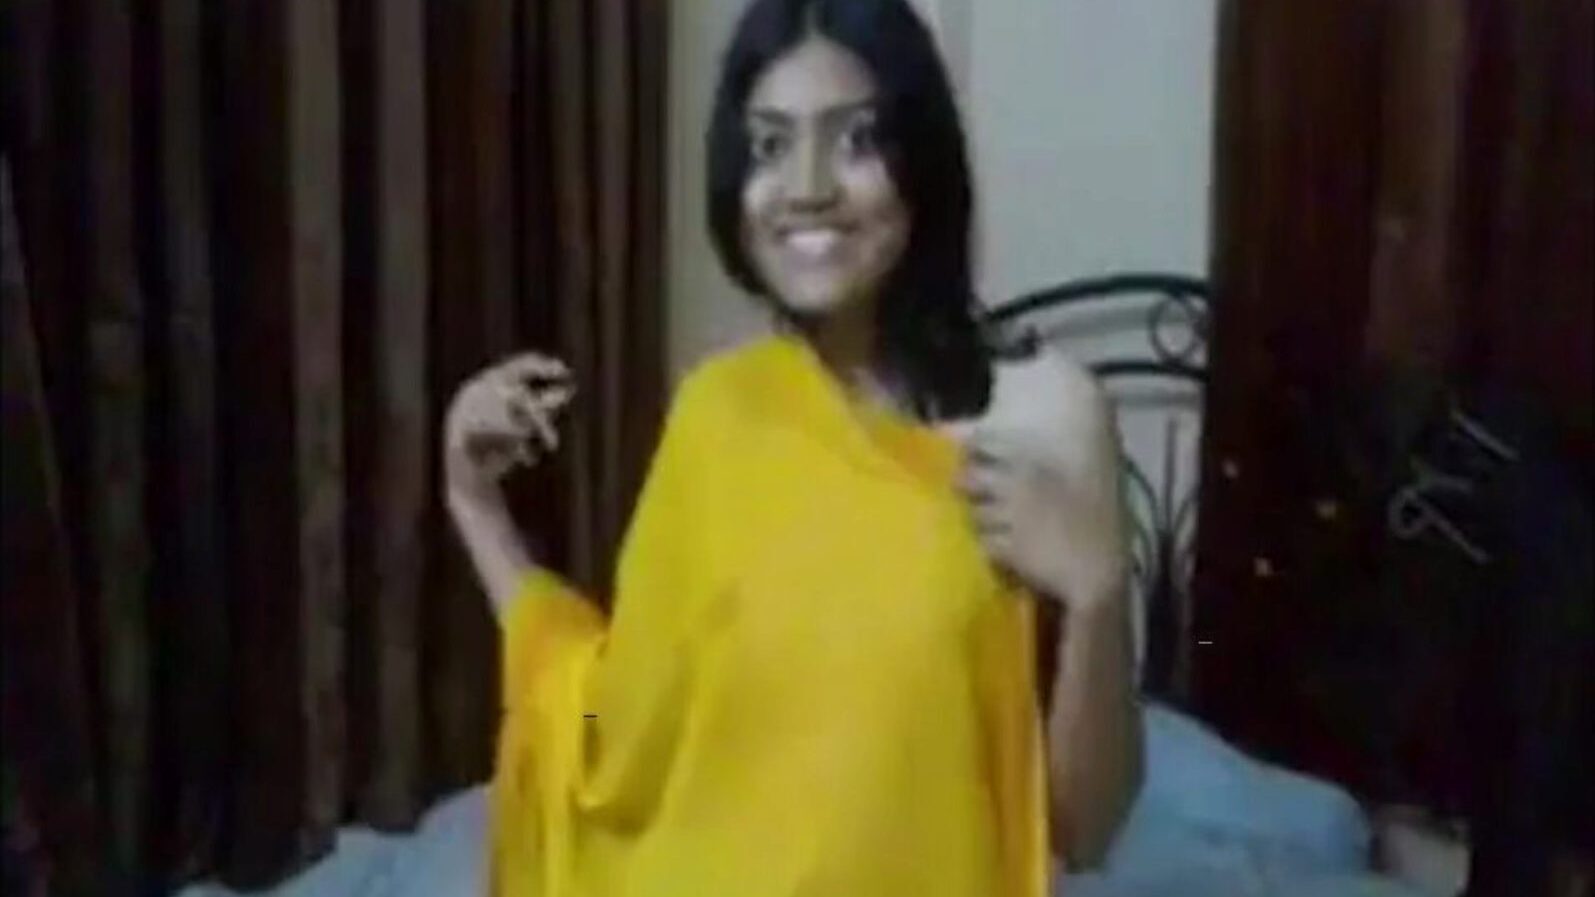 Indian College Girl Fuck by Stepbrother, Porn 0c: xHamster Watch Indian College Girl Fuck by Stepbrother movie on xHamster, the giant HD orgy tube site with tons of free Asian Fuck Online & Blowjob porno episodes